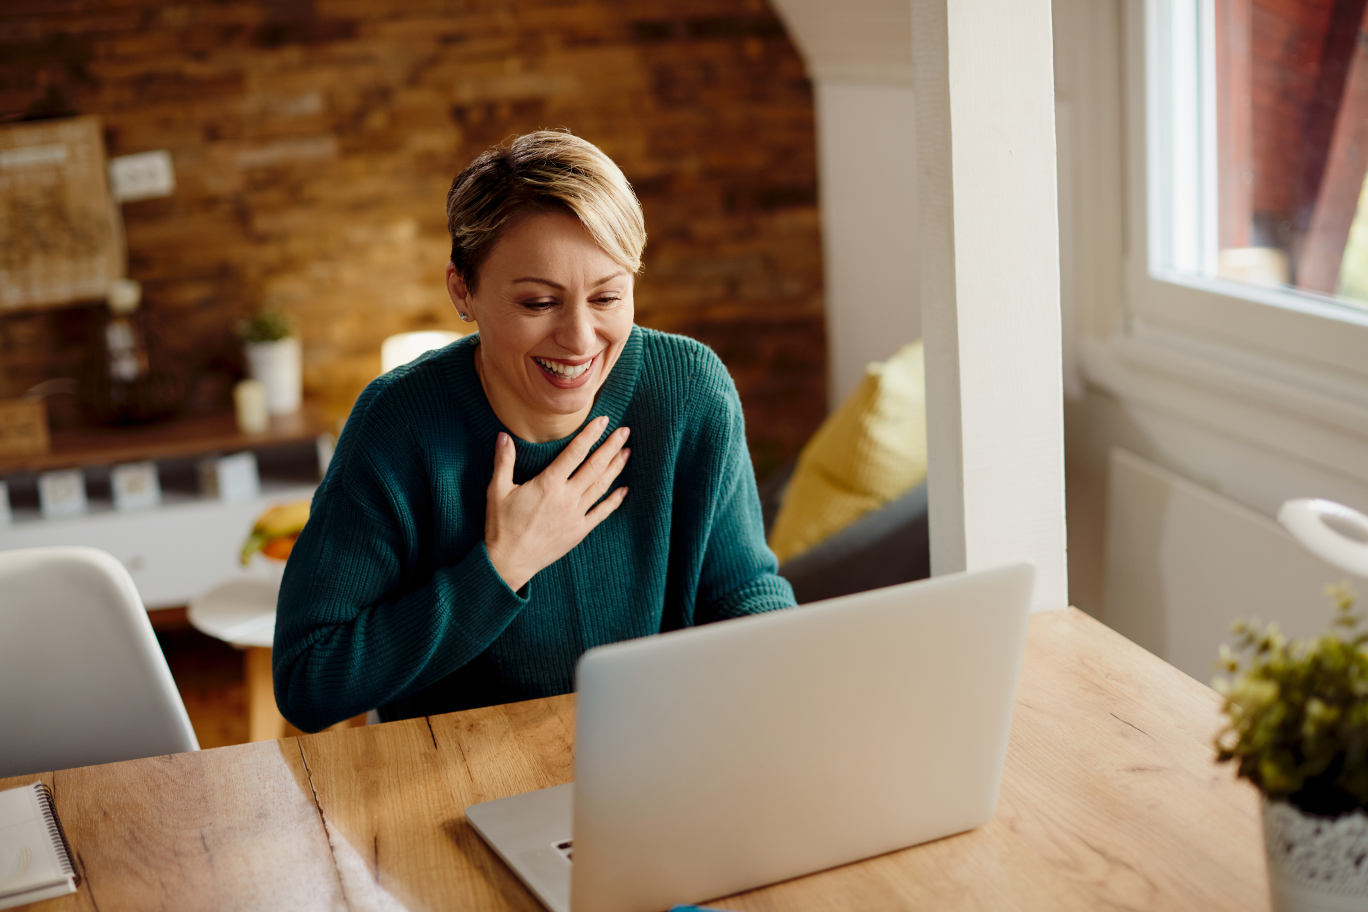 Relieved woman on telehealth video call